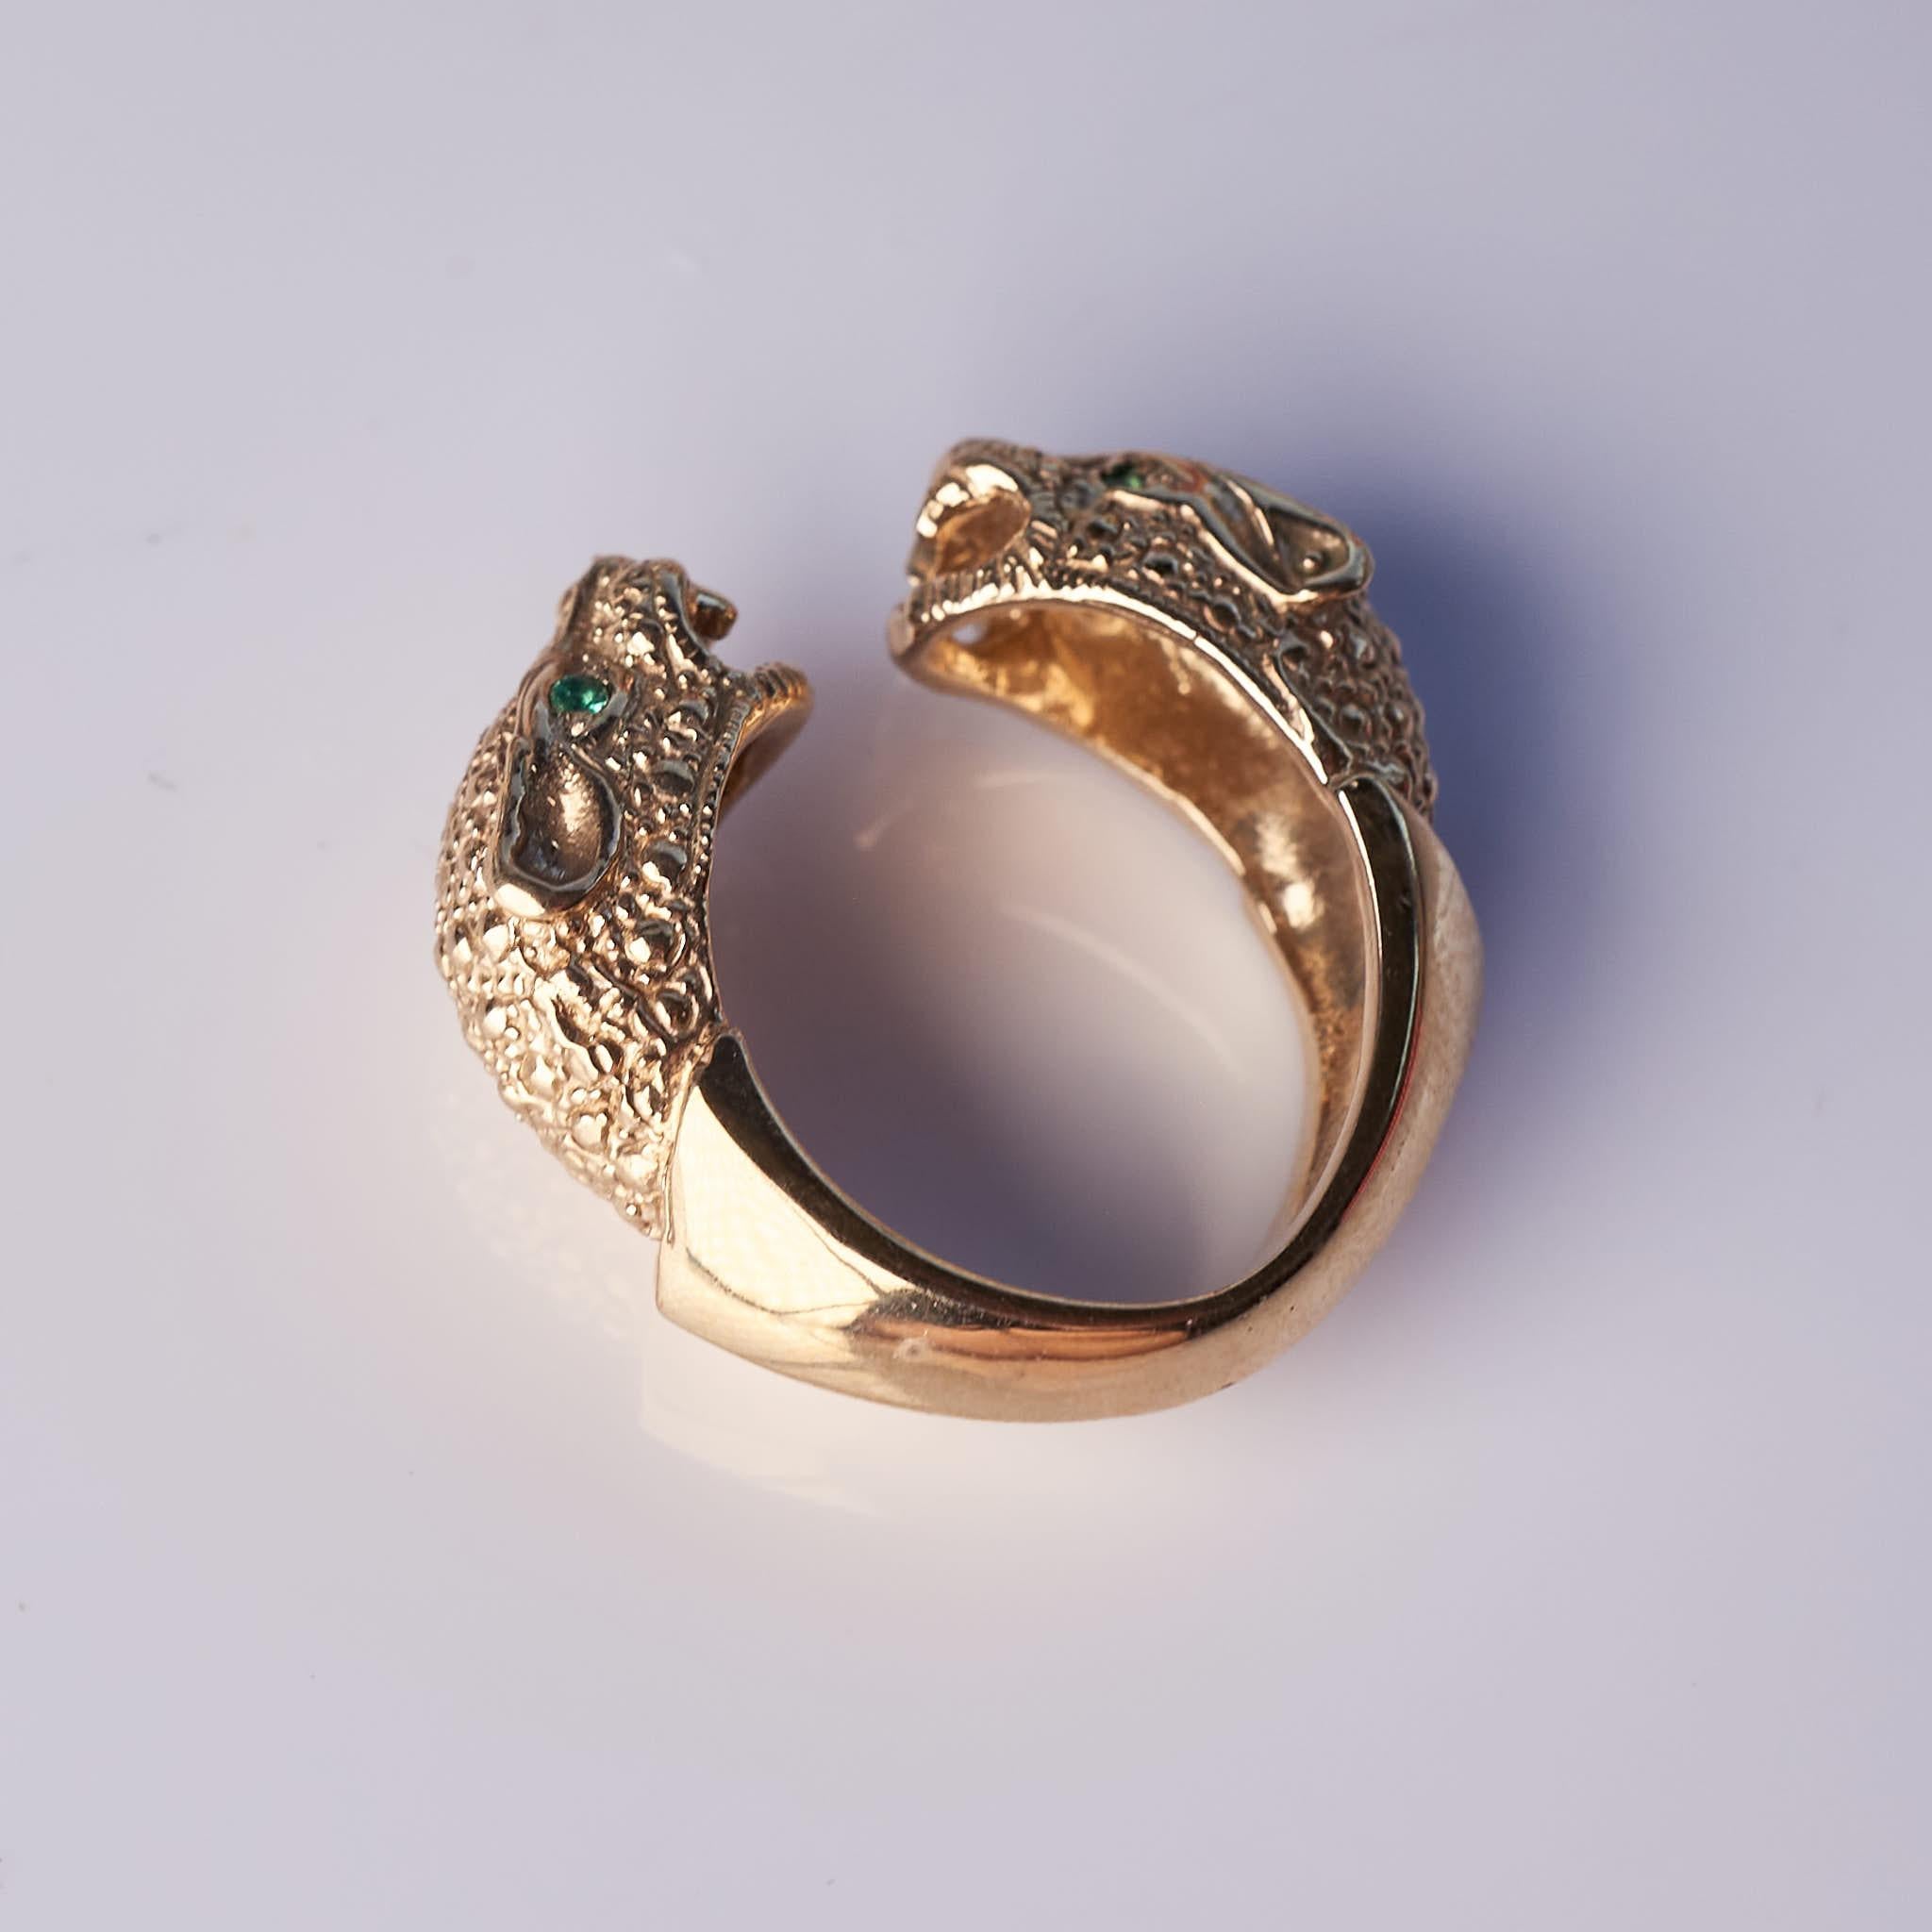 Emerald Jaguar Ring Gold Animal Cocktail Ring Animal Jewelry J Dauphin For Sale 3